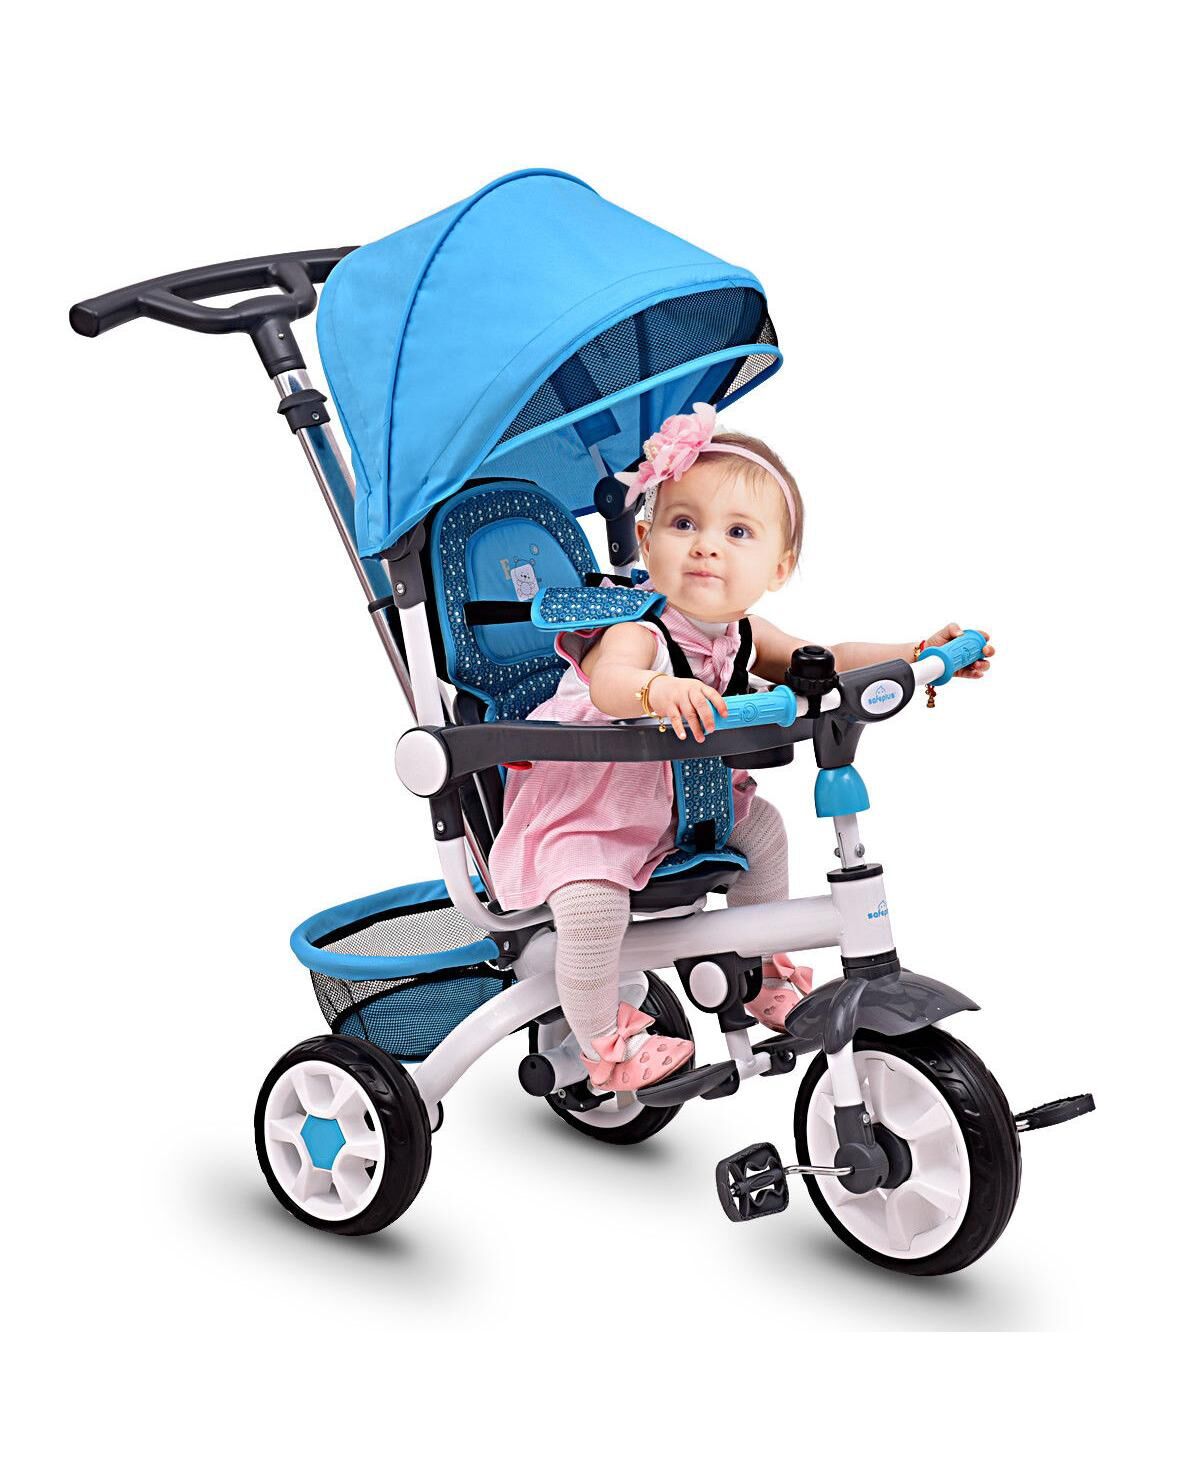 Costway Baby Stroller Tricycle Detachable Learning Toy Bike - Blue